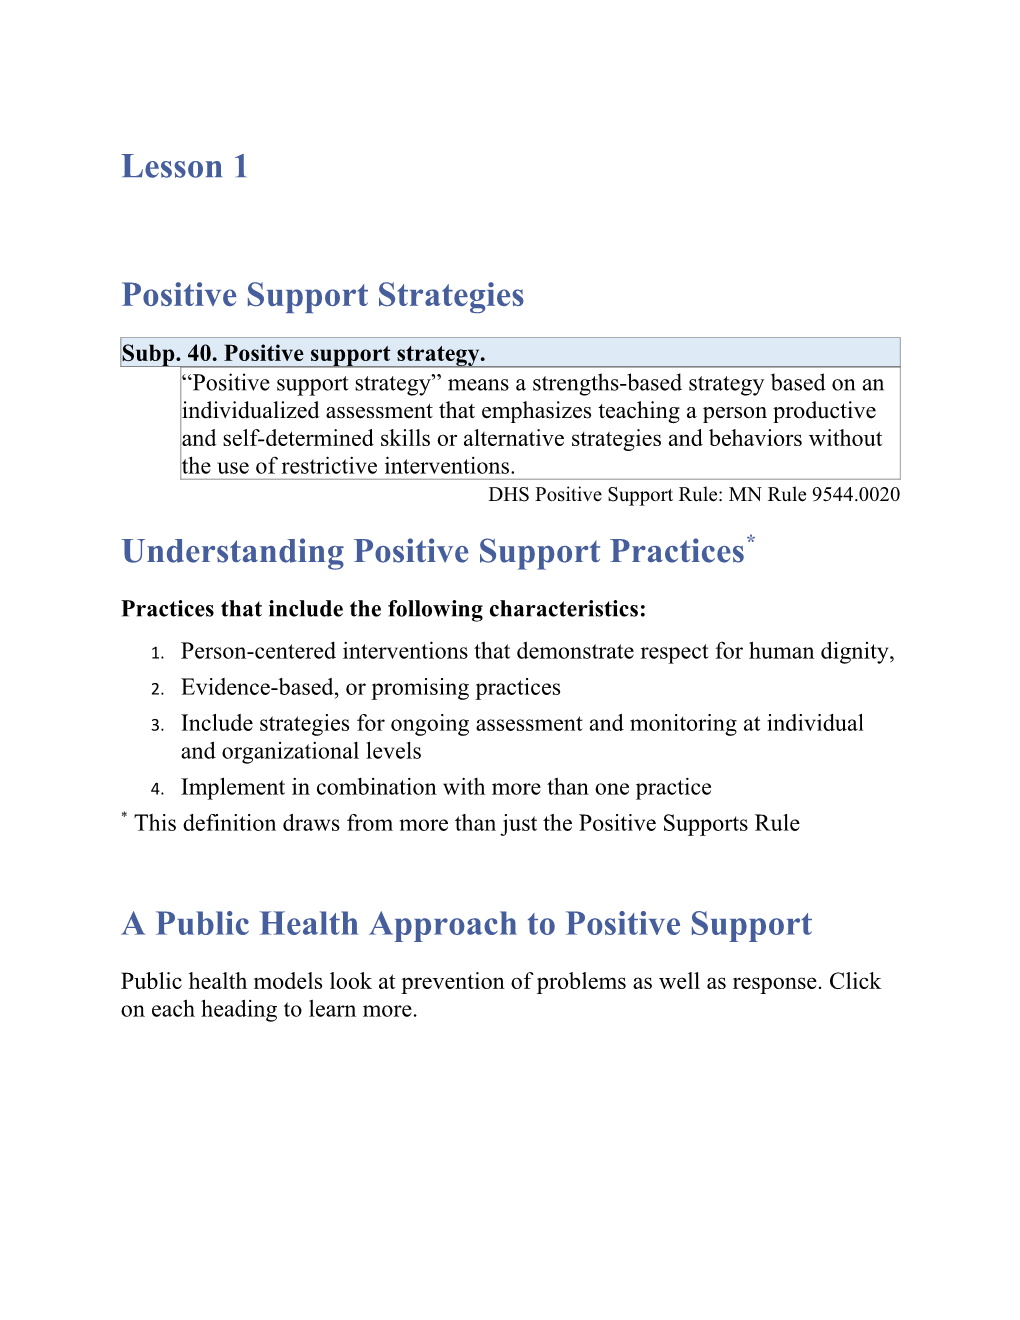 Subp. 40. Positive Support Strategy